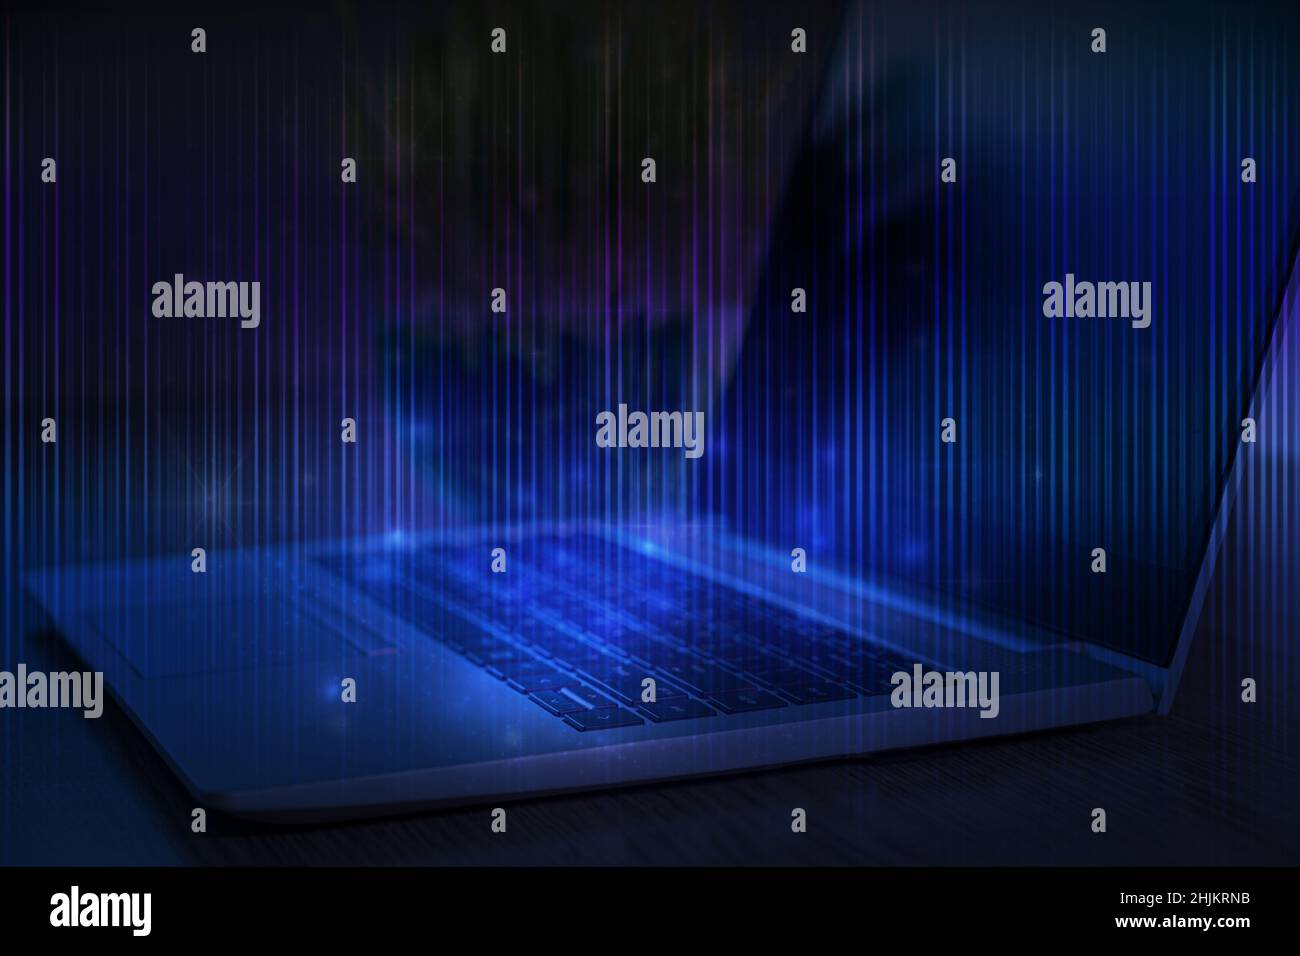 Technological background. Laptop with stripes of light on blue. Learn programming language, computer courses, training. Stock Photo